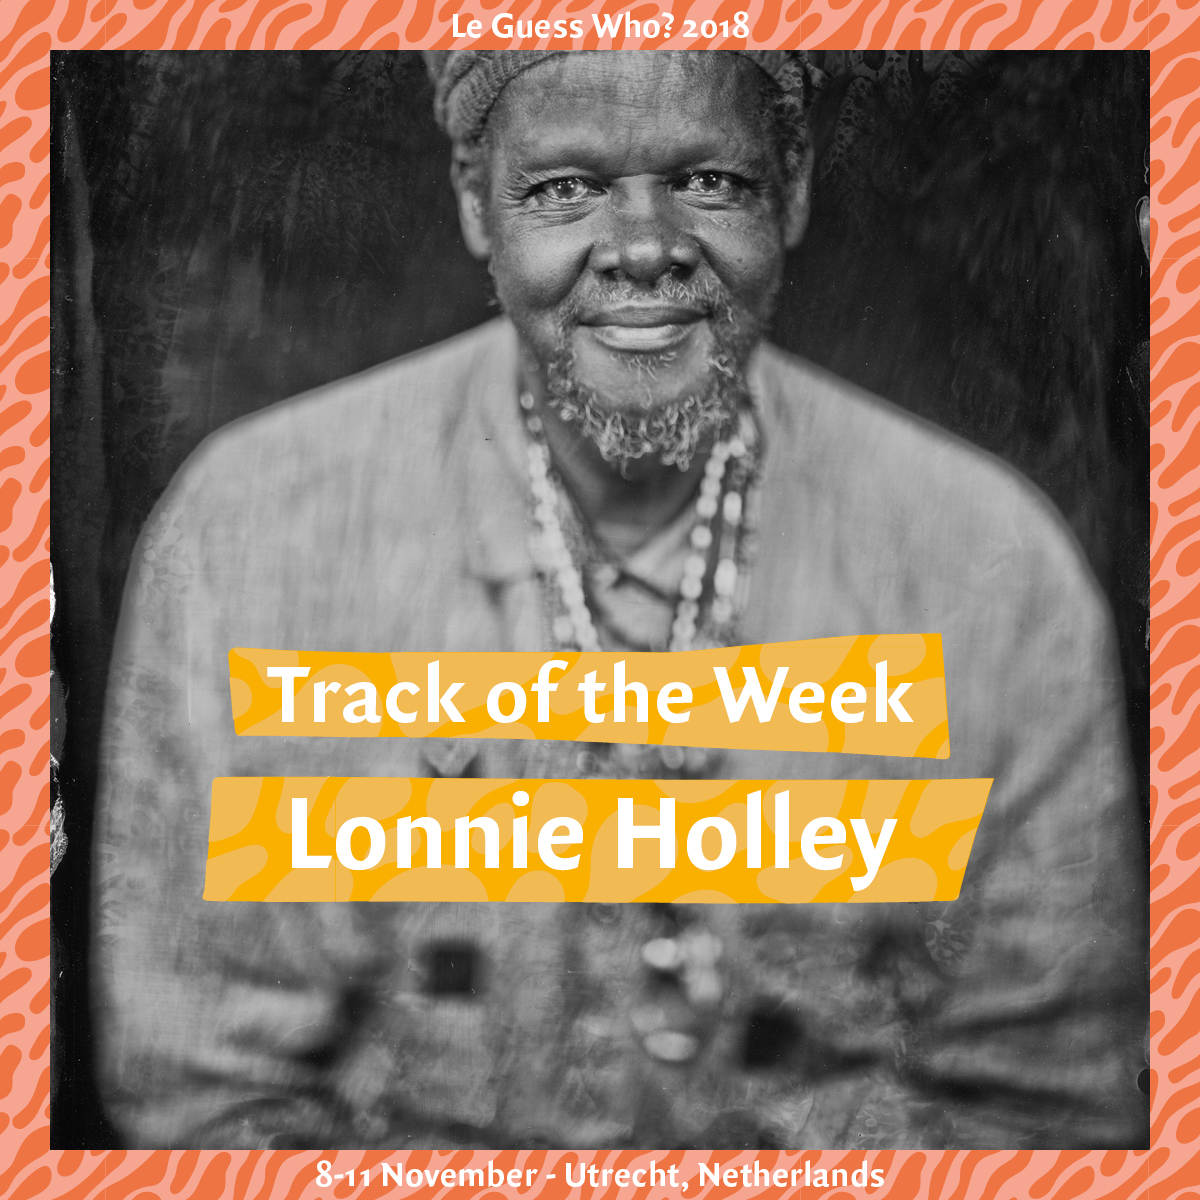 Track of the Week #21: Lonnie Holley - 'Sometimes I Wanna Dance'